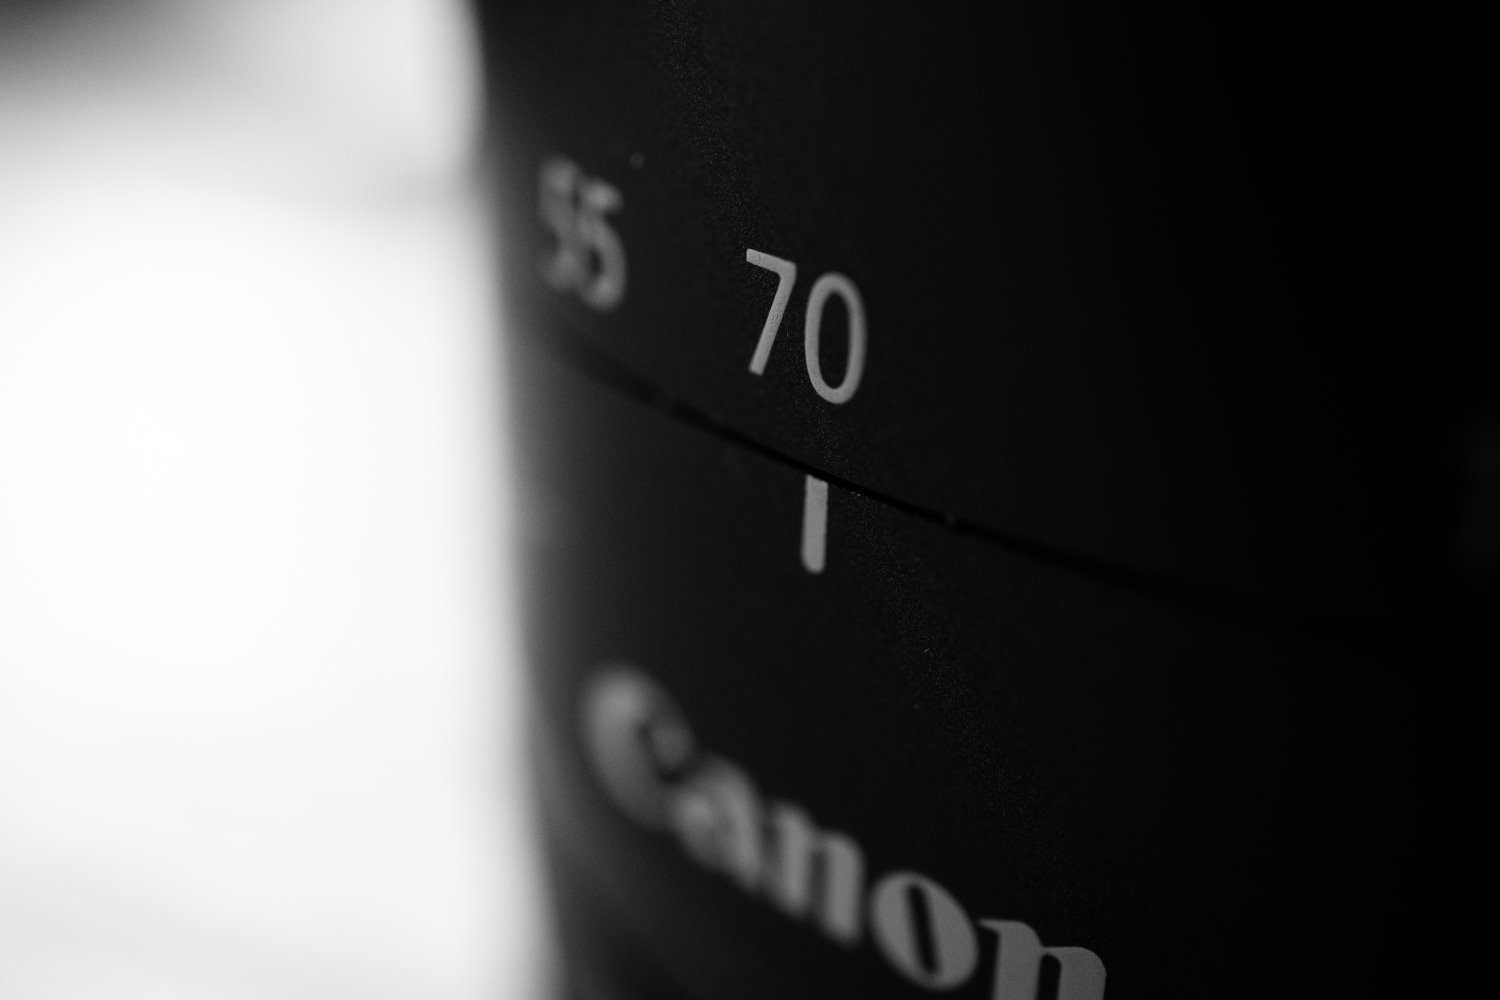 24-70mm lens photography